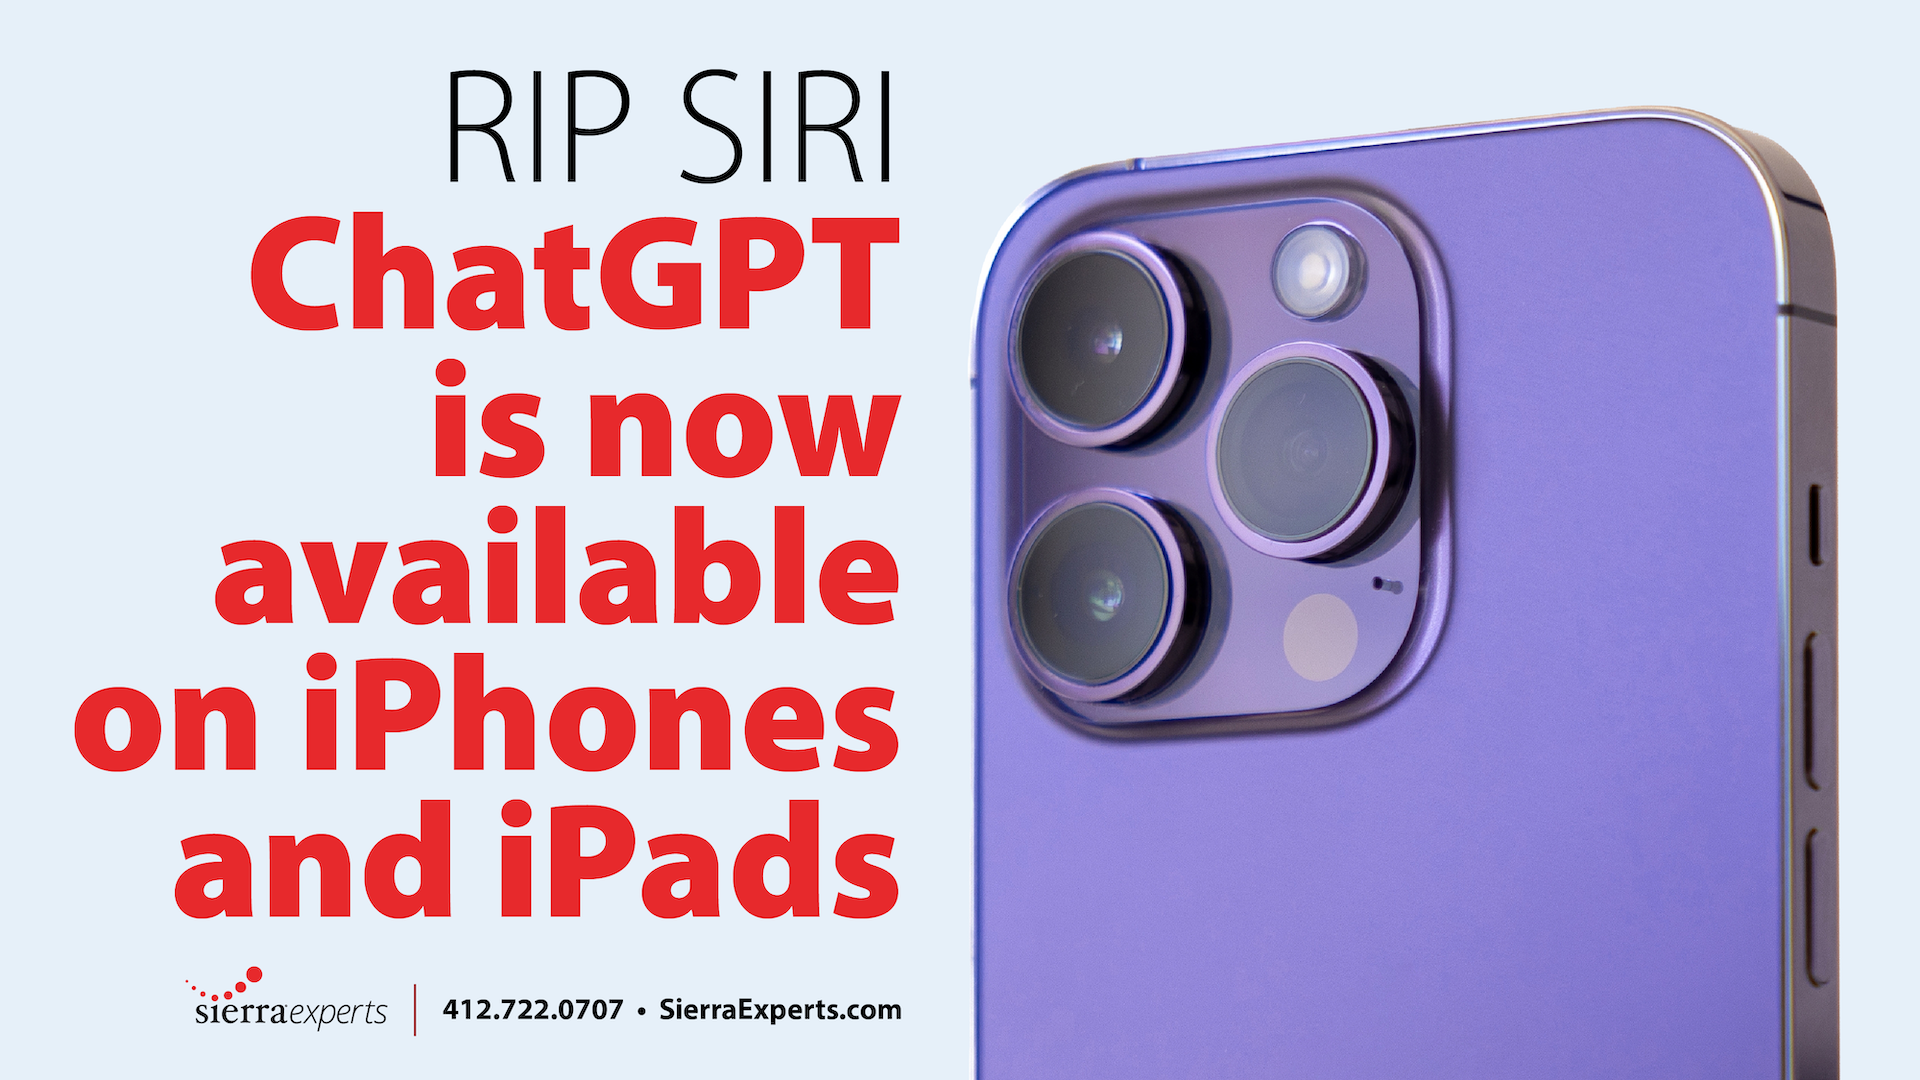 Purple iPhone mourning Siri due to ChatGPT being available on iPhones